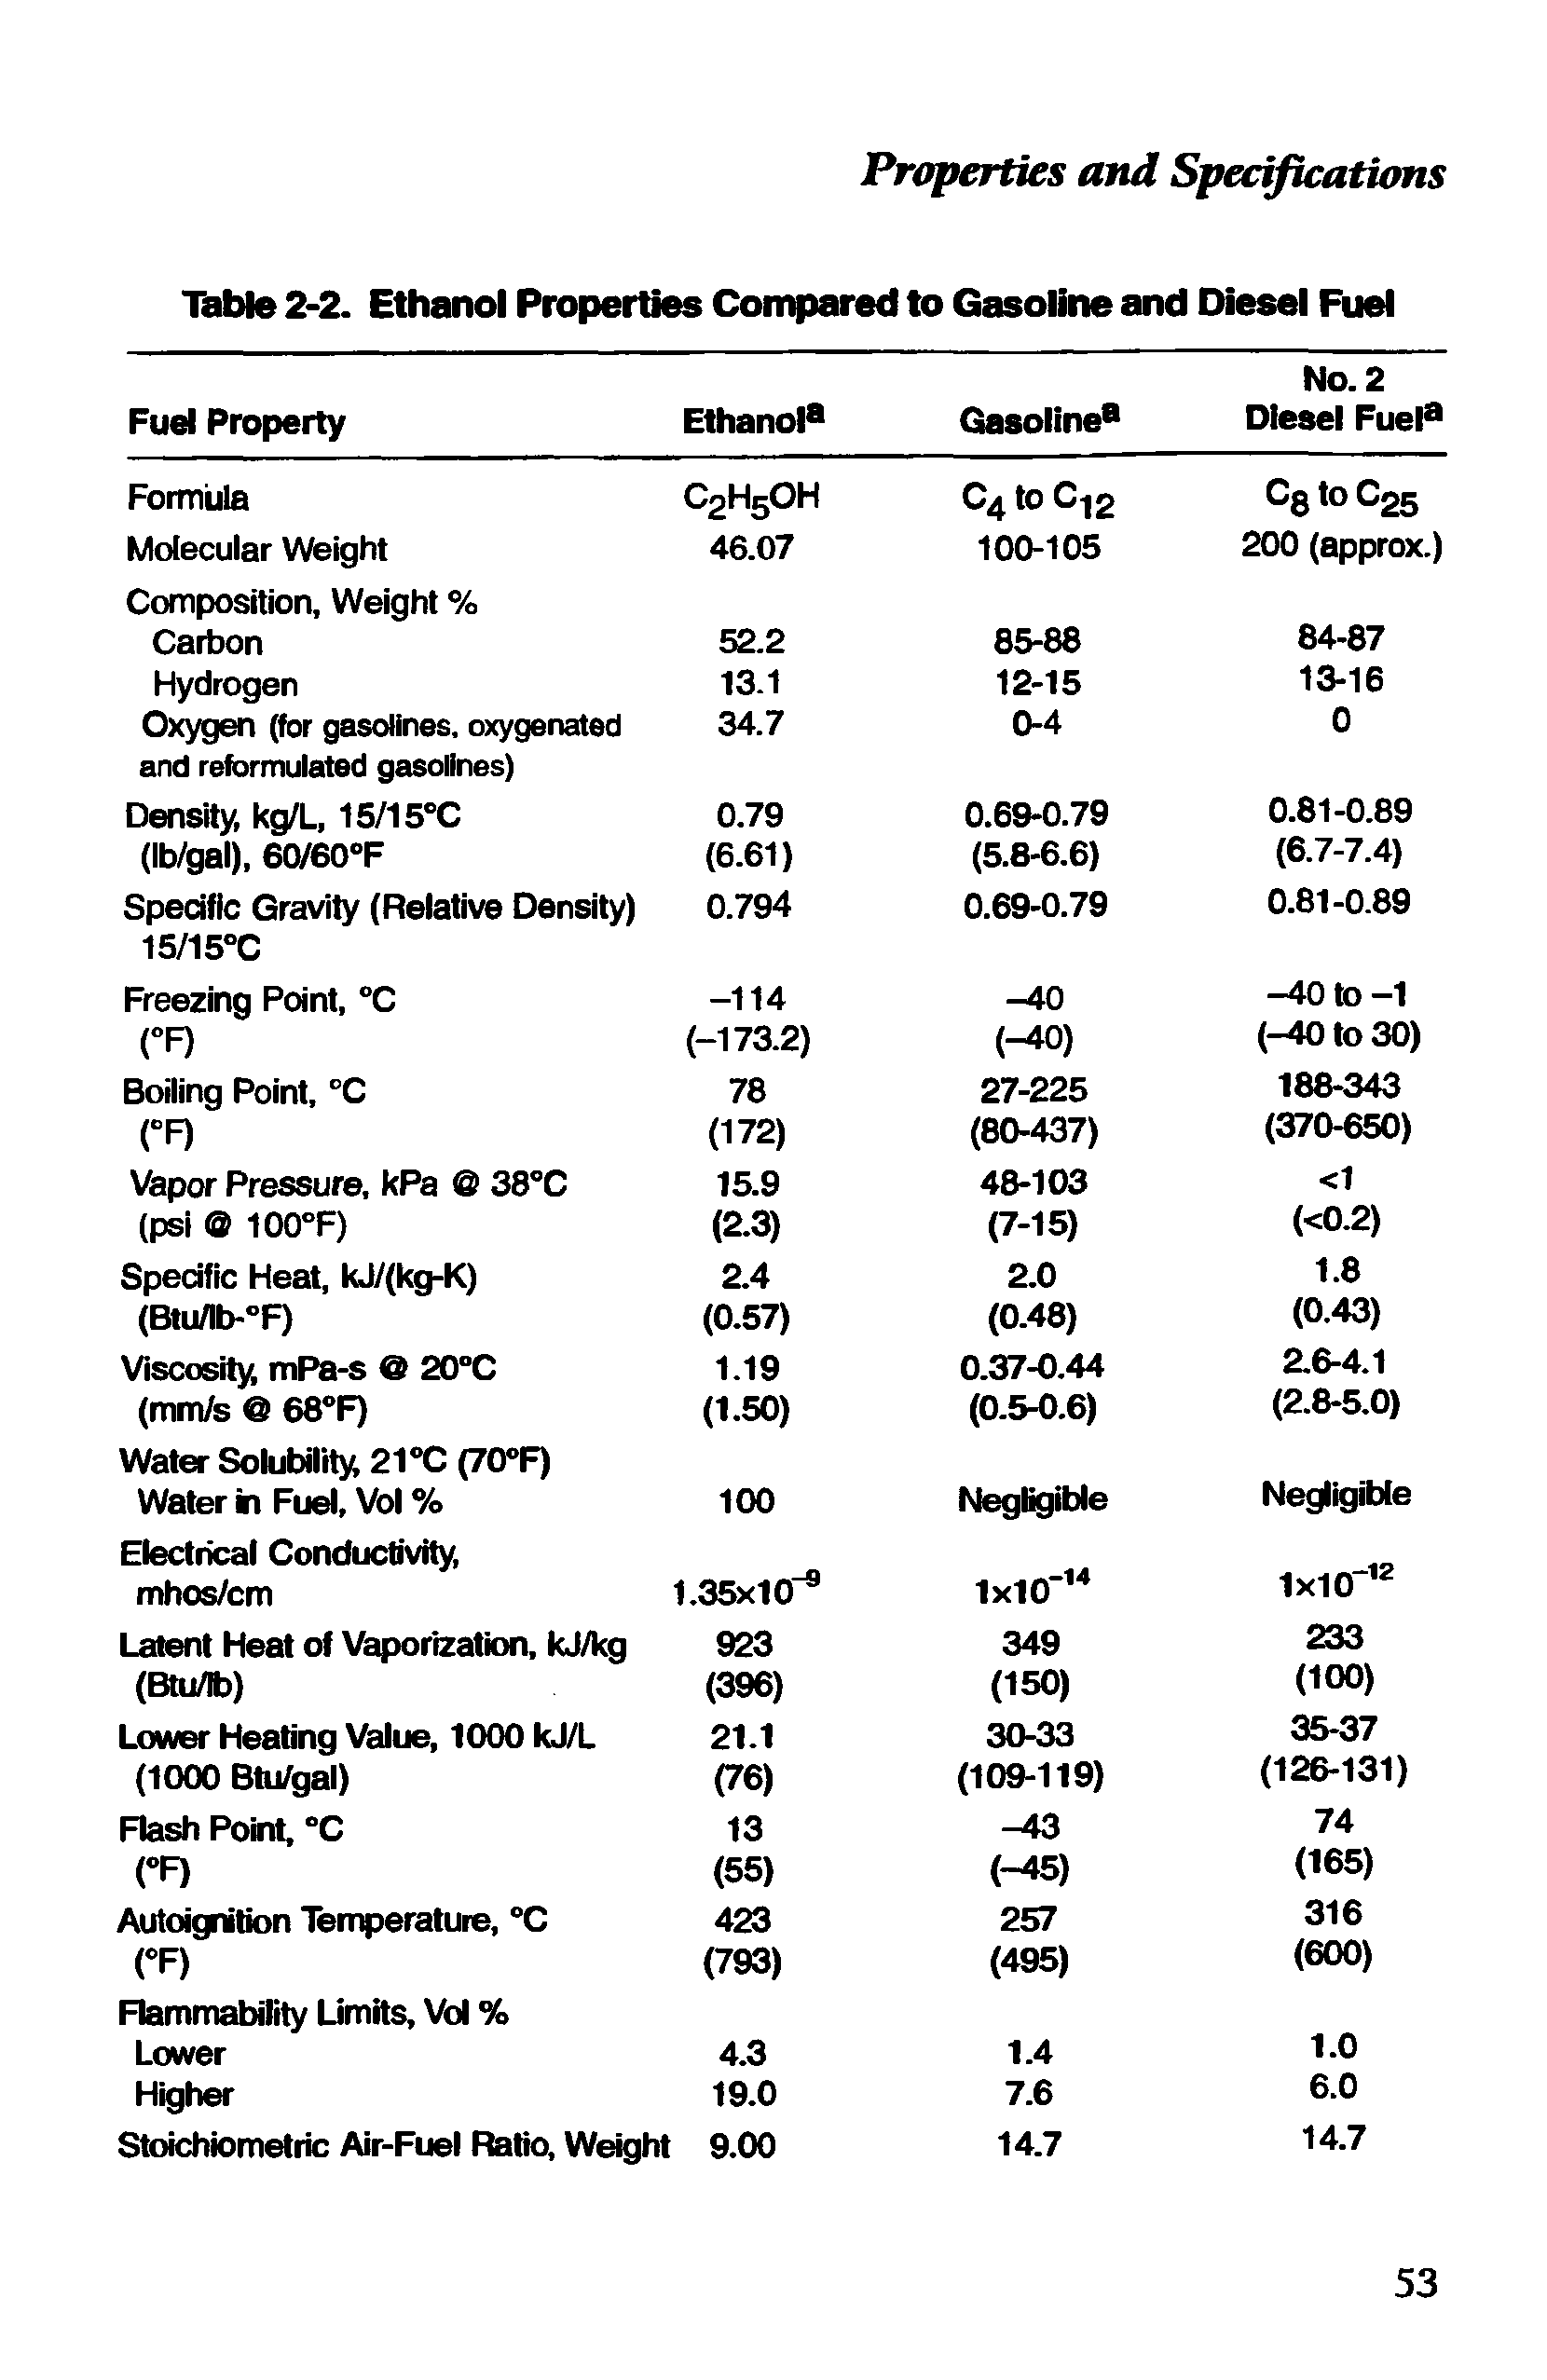 Table 2-2. Ethanol Properties Compared to Gasoline and Diesel Fuel...